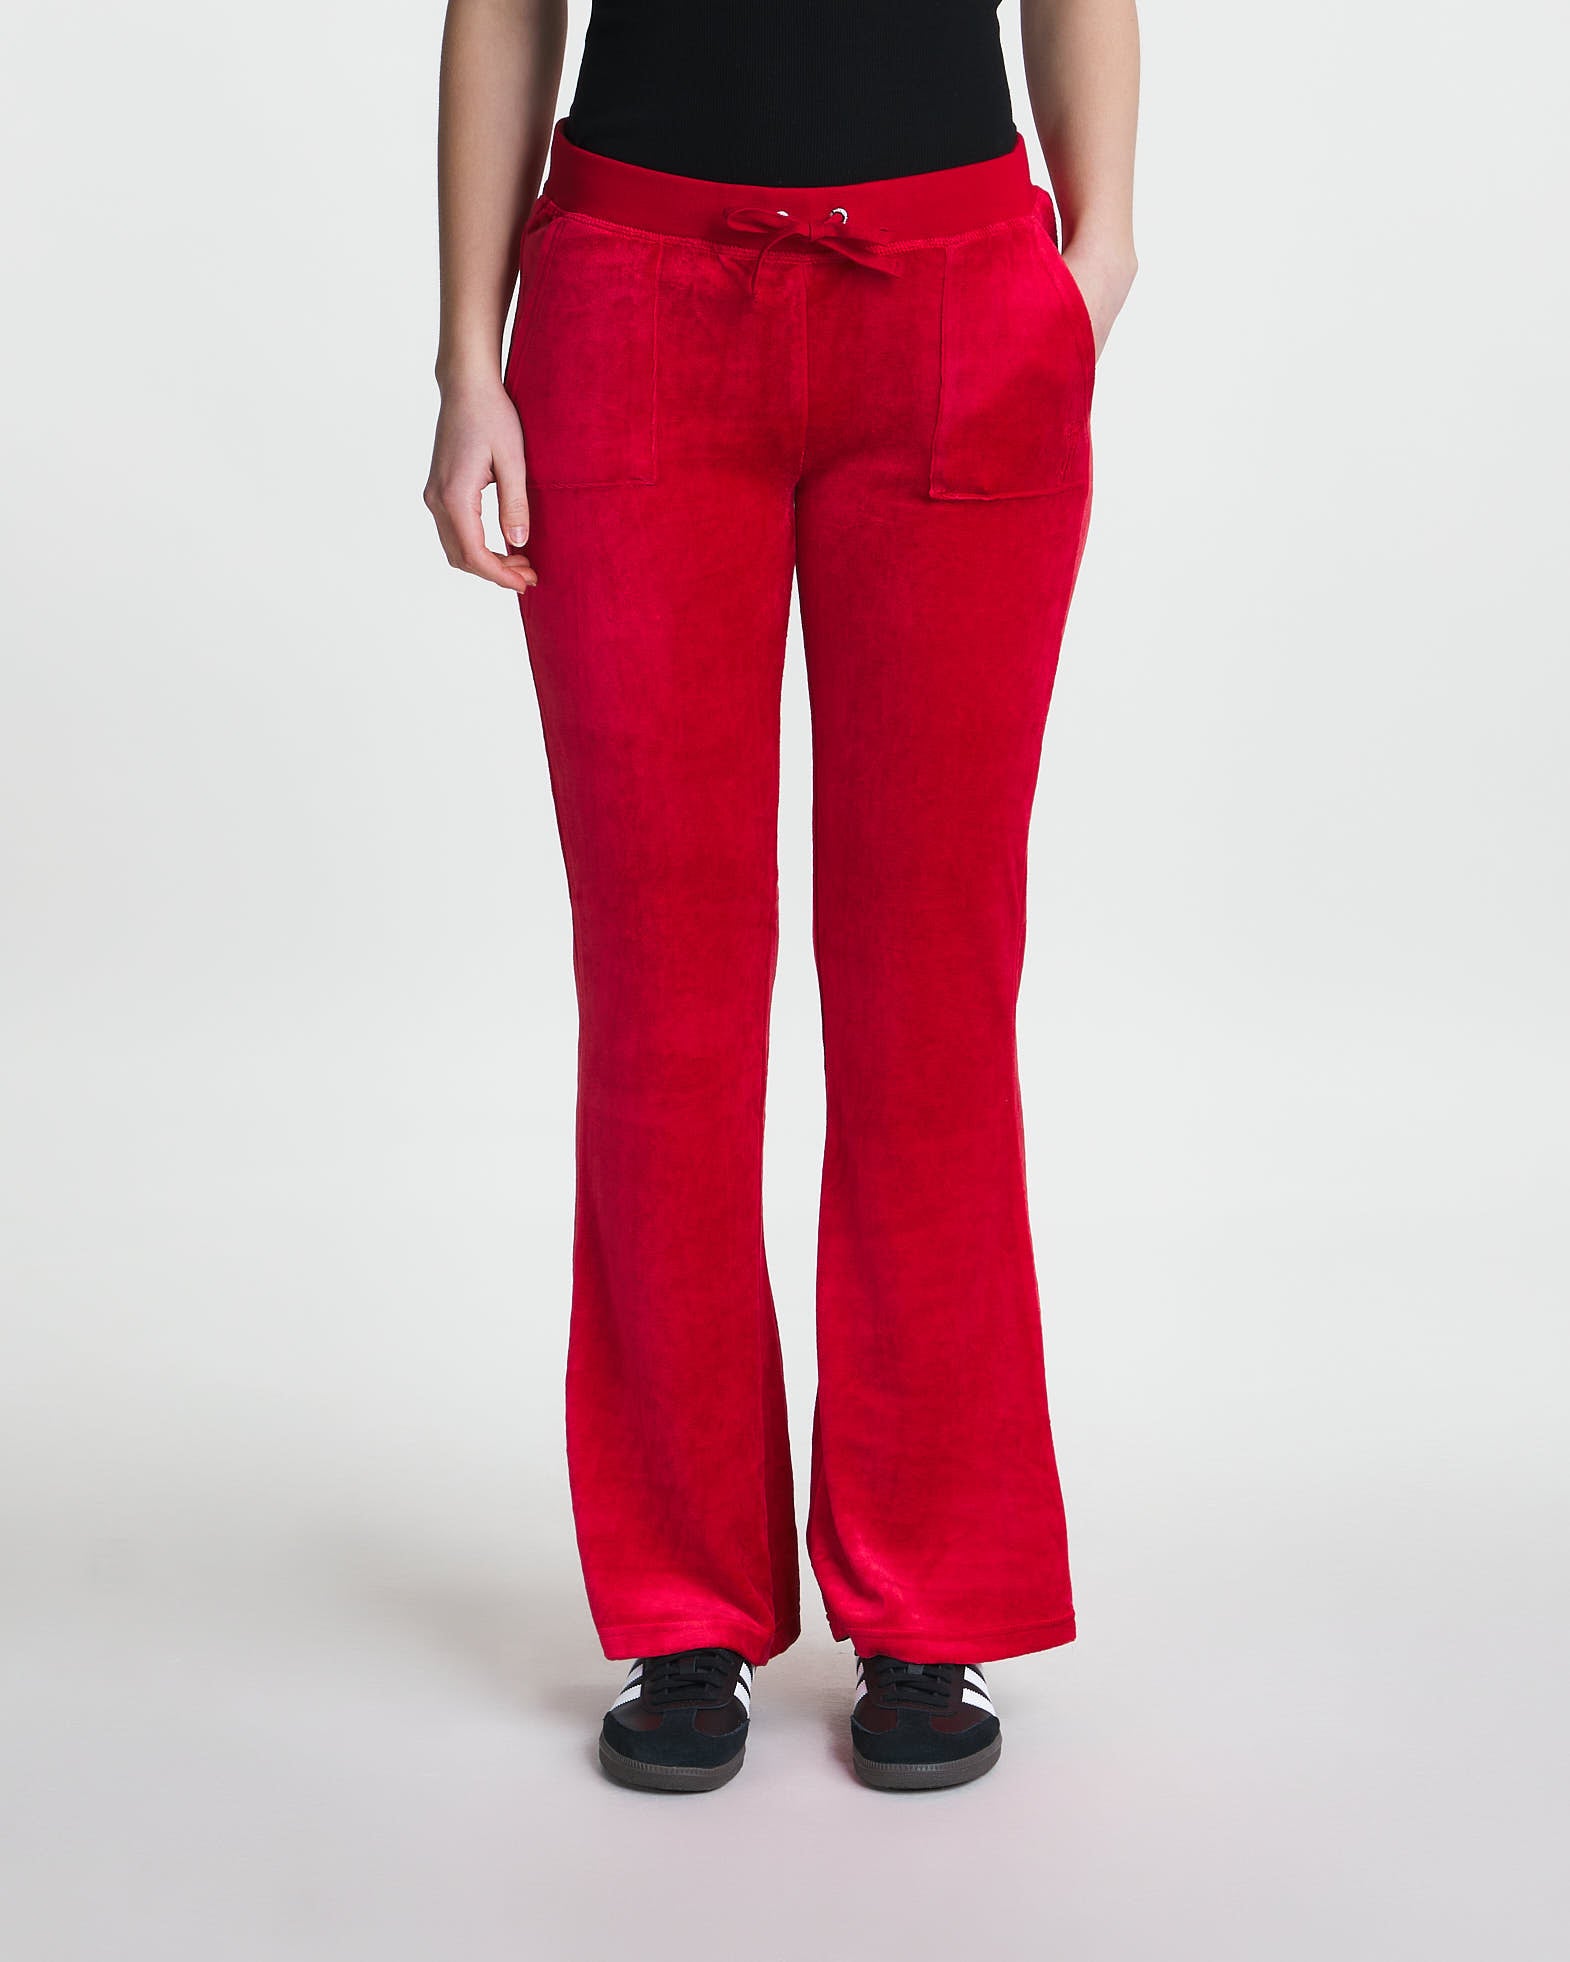 Juicy Couture Trousers Caisa Ultra Low Rise Red von Juicy Couture